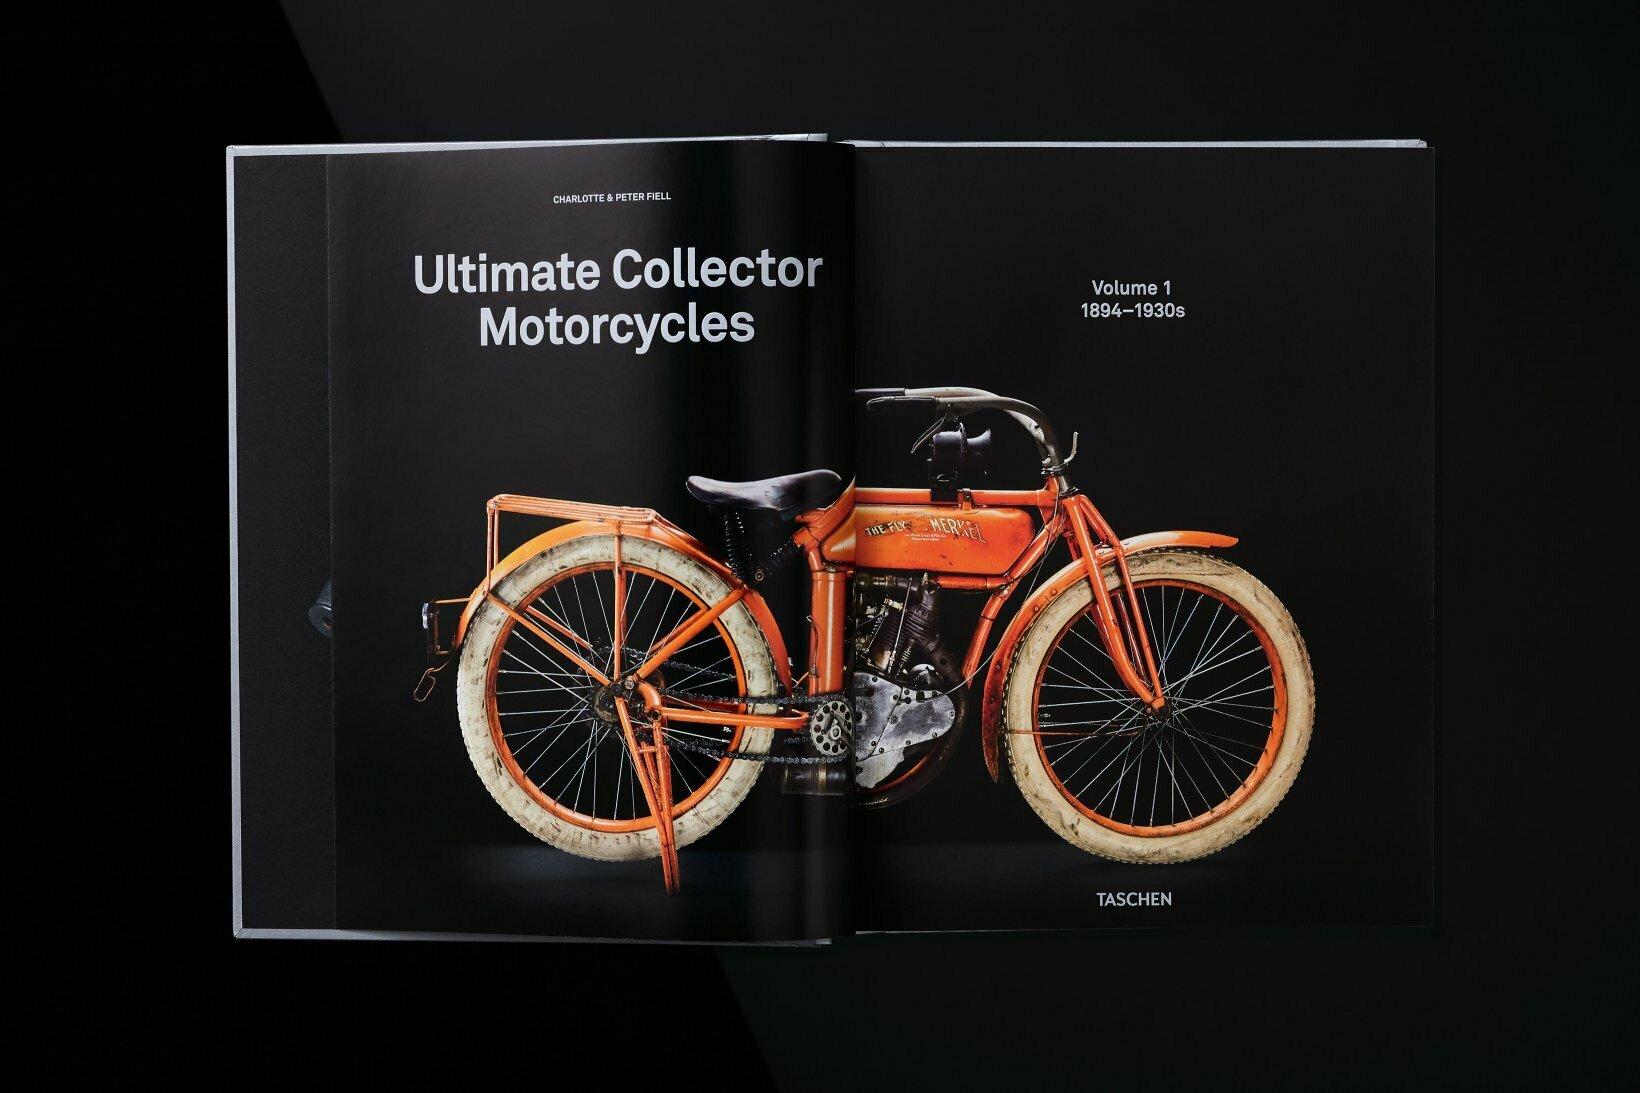 Italian Ultimate Collector Motorcycles. Limited Edition with Aluminum Print Covers For Sale